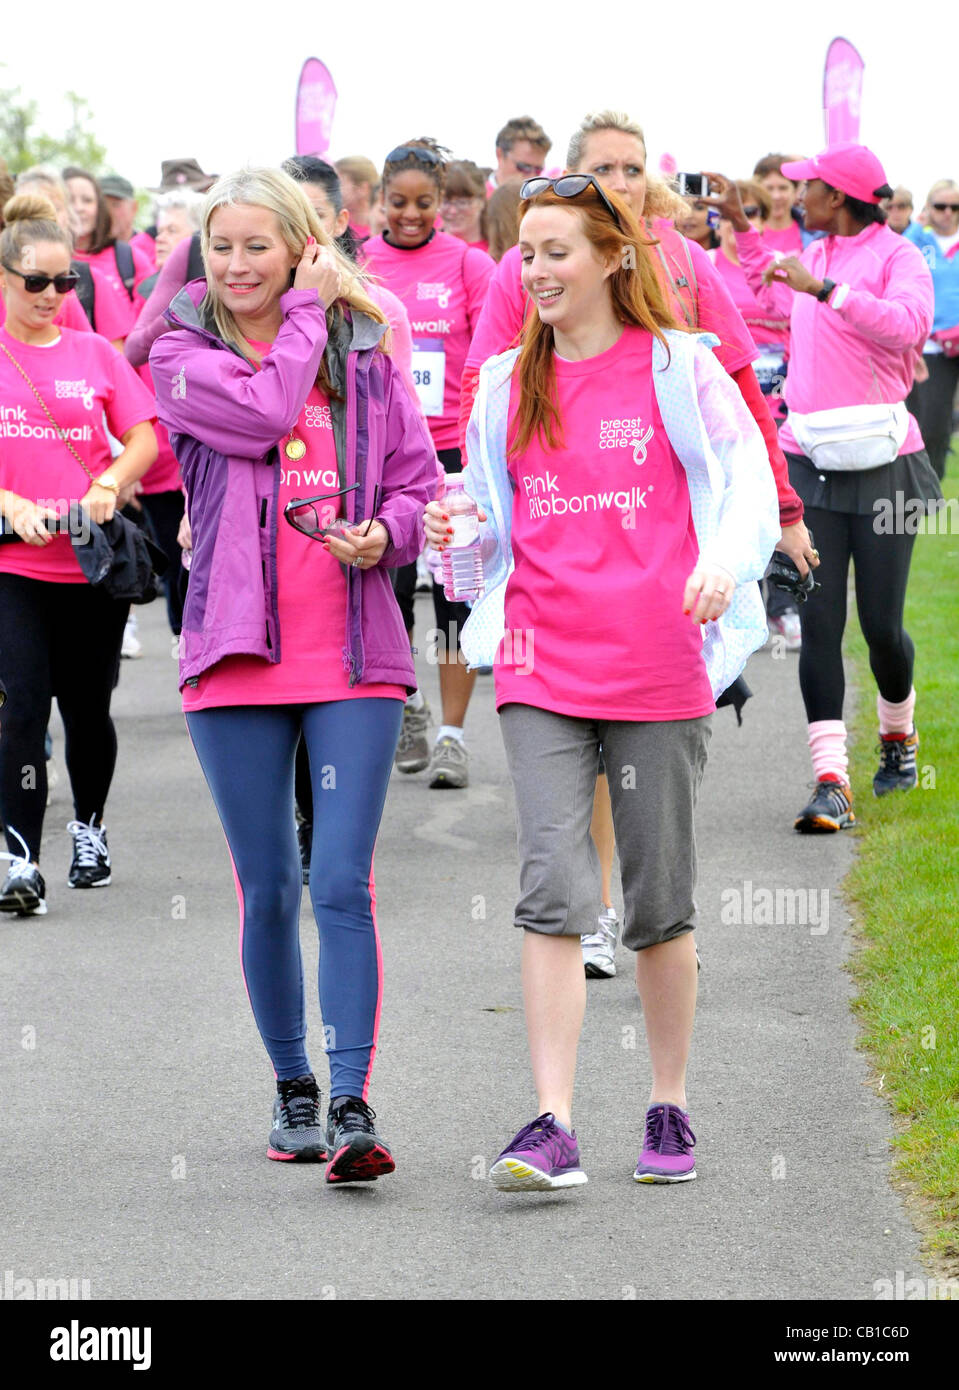 Blenheim Palace, England - Denise Van Outen and Siobhan Donaghy at the Pink Ribbonwalk at Blenheim Palace, Woodstock, Oxfordshire - May 19th 2012  Photo by People Press Stock Photo